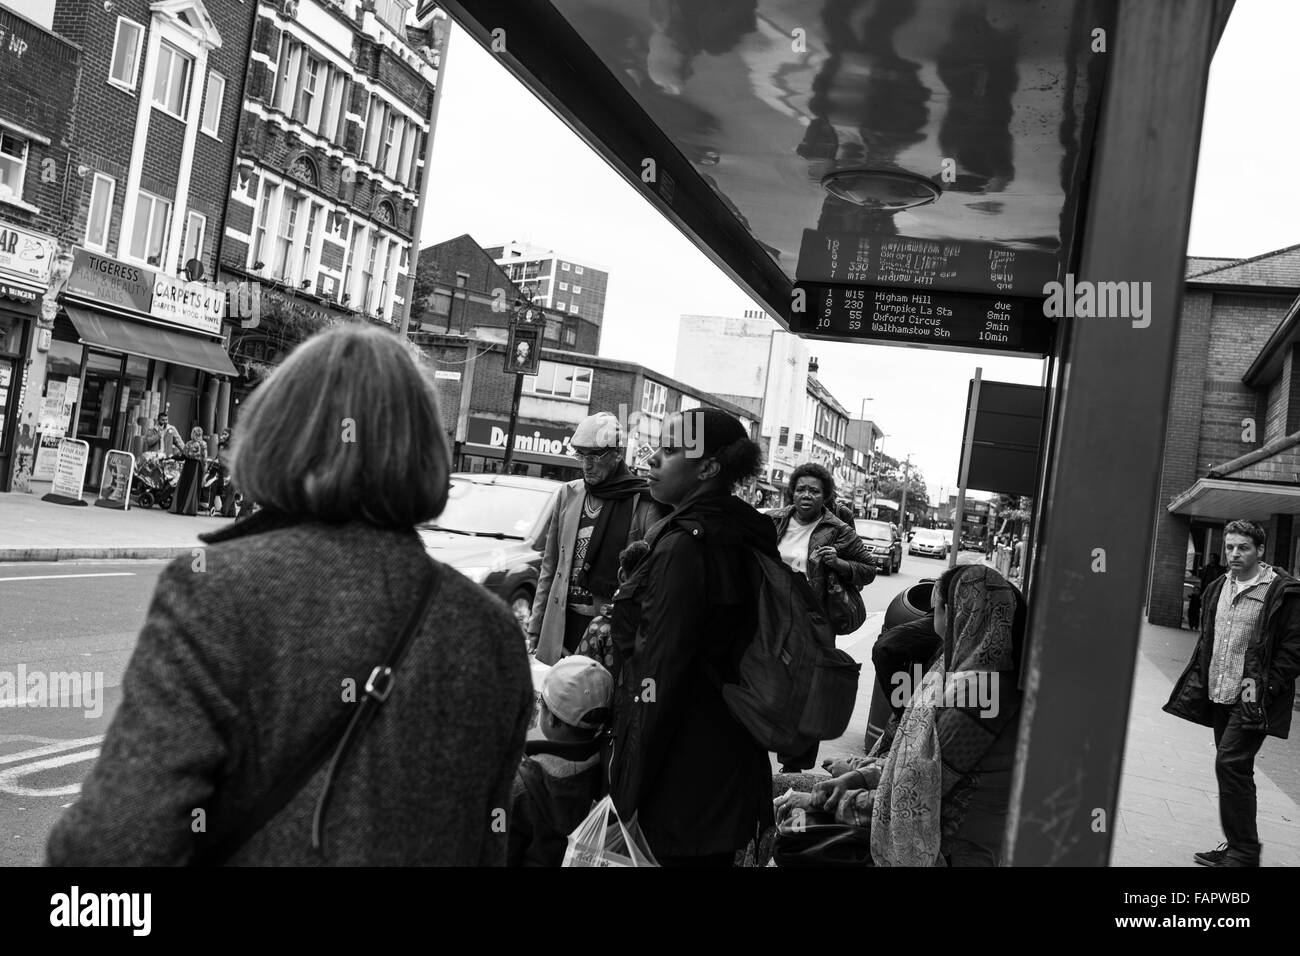 People waiting at bus stop in Leyton, East London Stock Photo